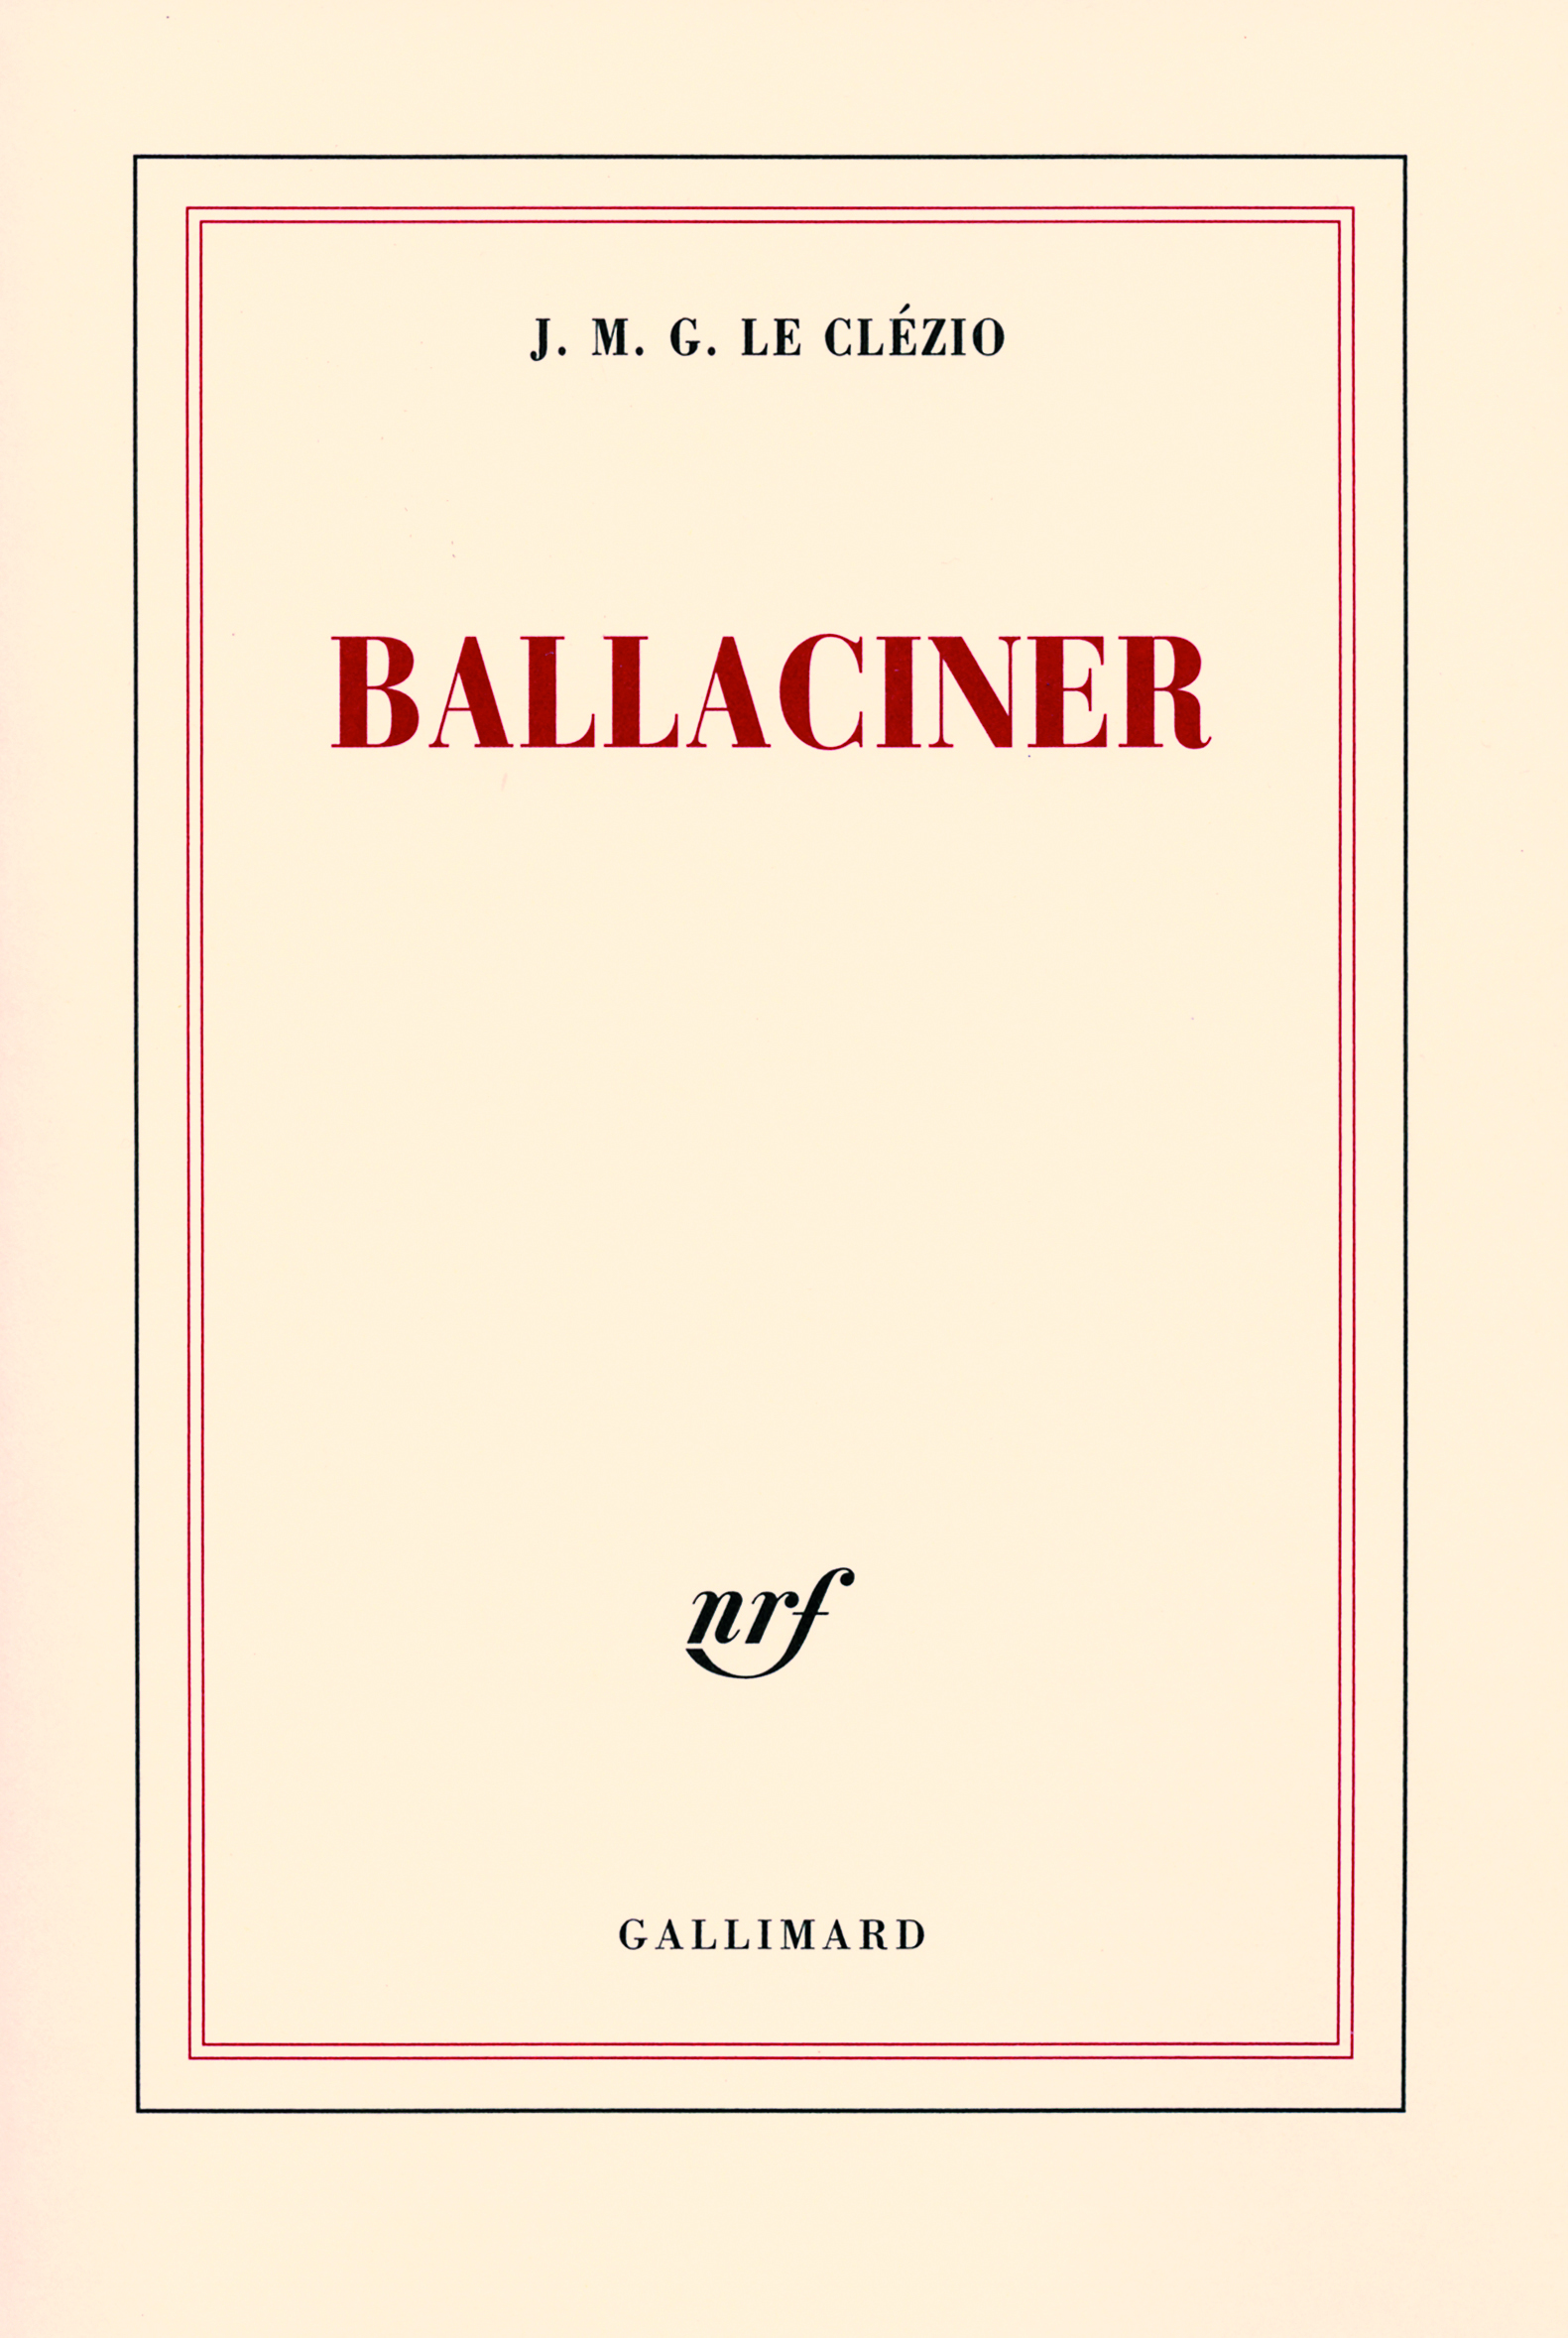 Ballaciner (9782070784844-front-cover)